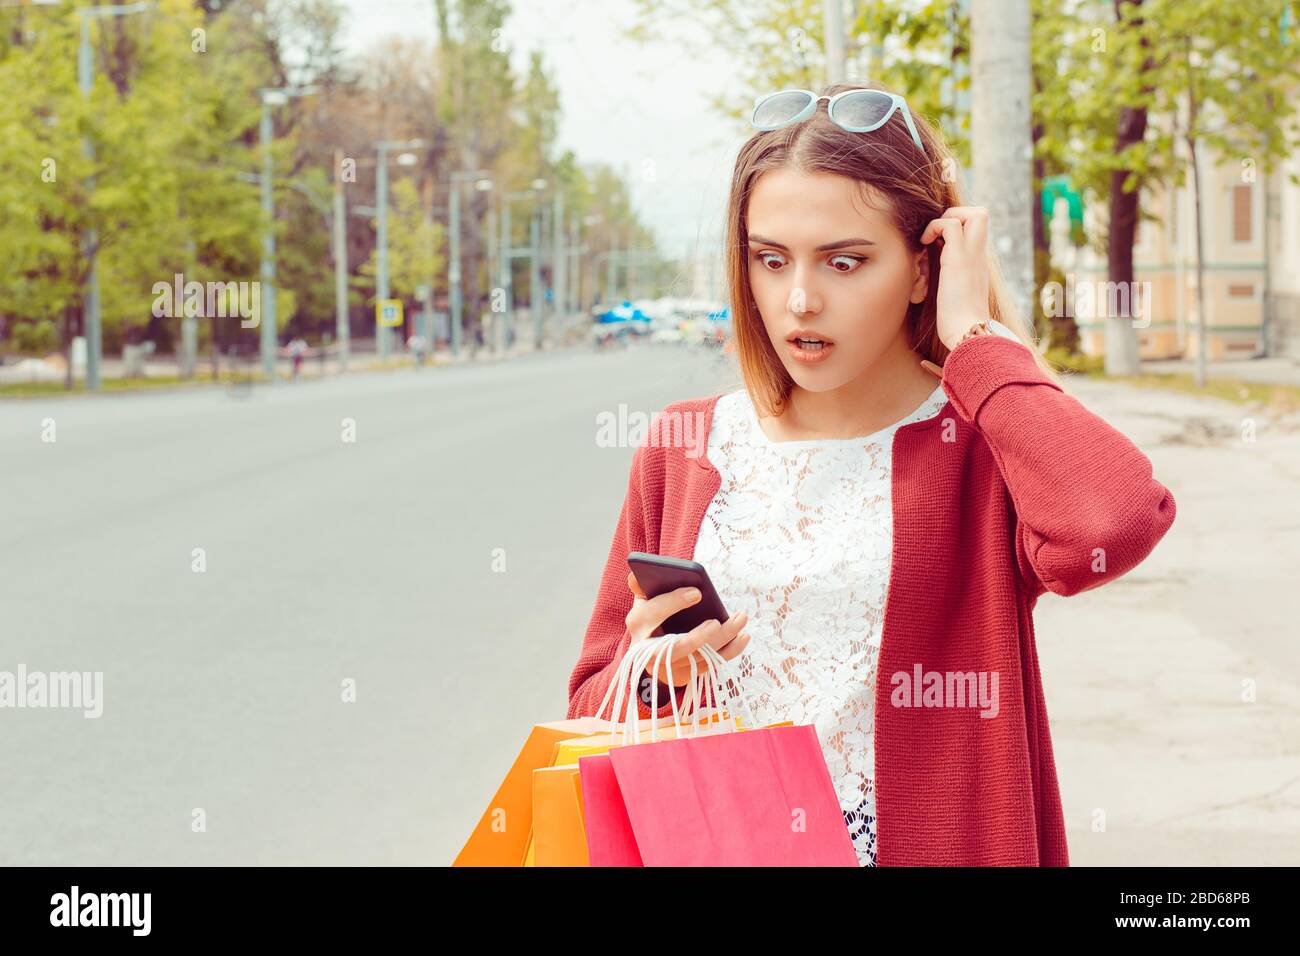 SMS. Closeup portrait funny shocked anxious scared young girl Lady looking at phone seeing bad news photos bully message with disgusting emotion on fa Stock Photo